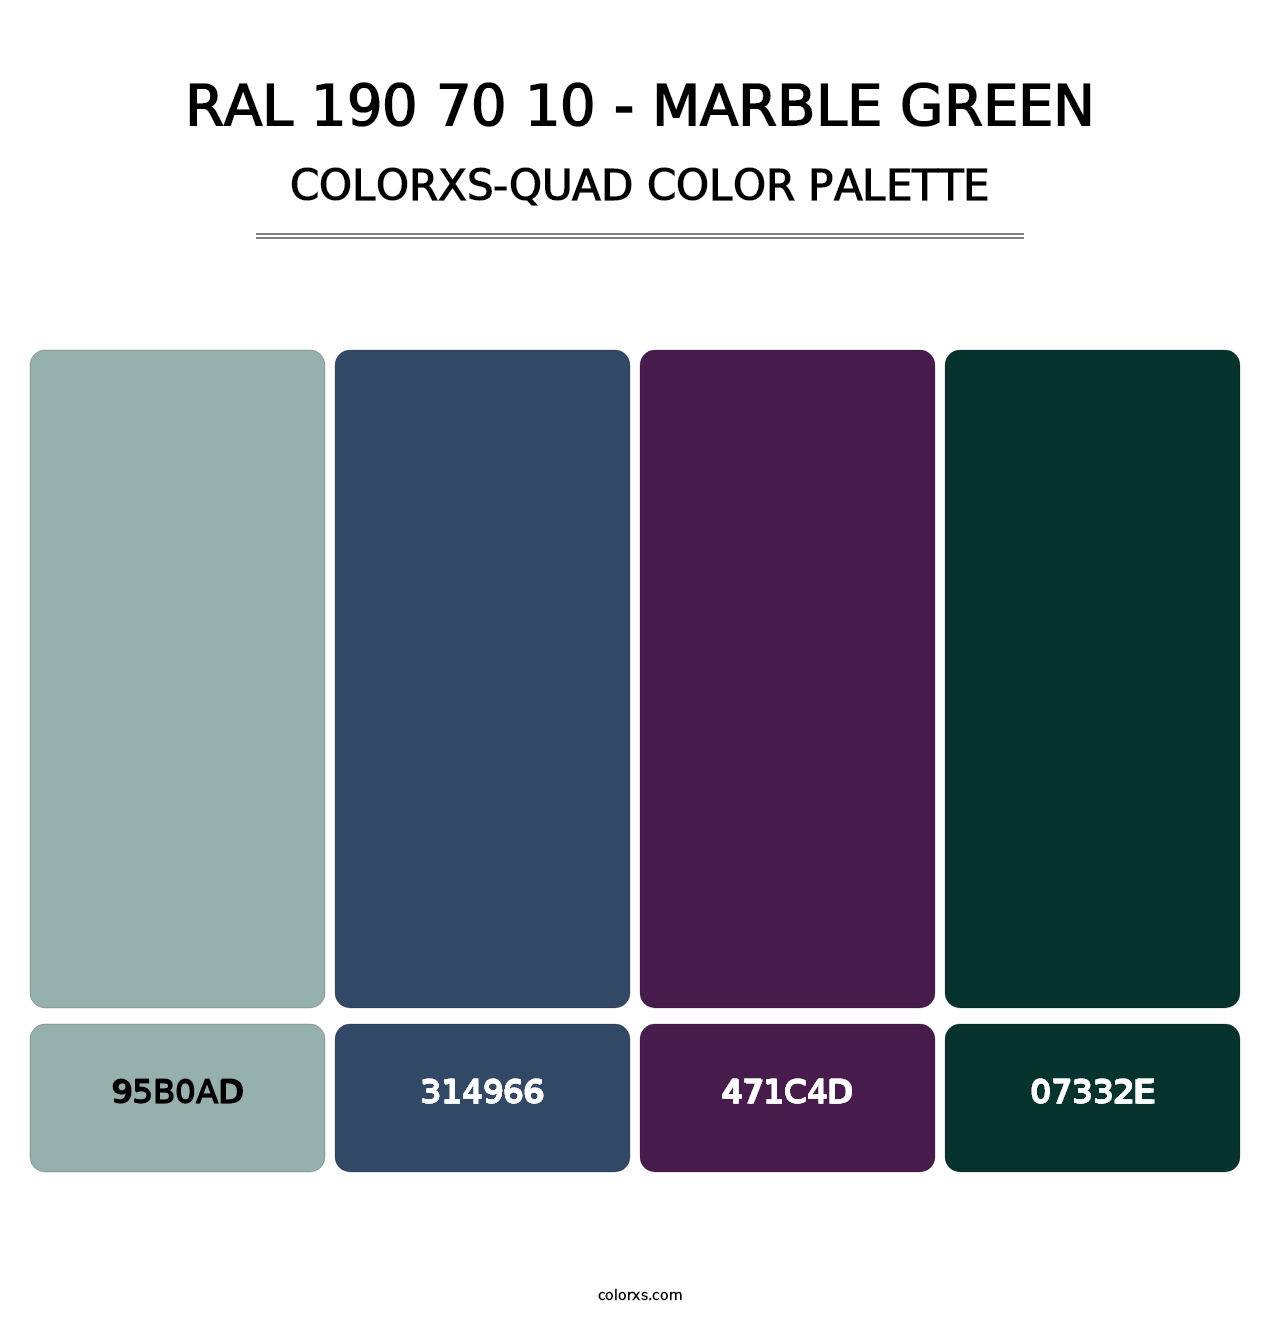 RAL 190 70 10 - Marble Green - Colorxs Quad Palette